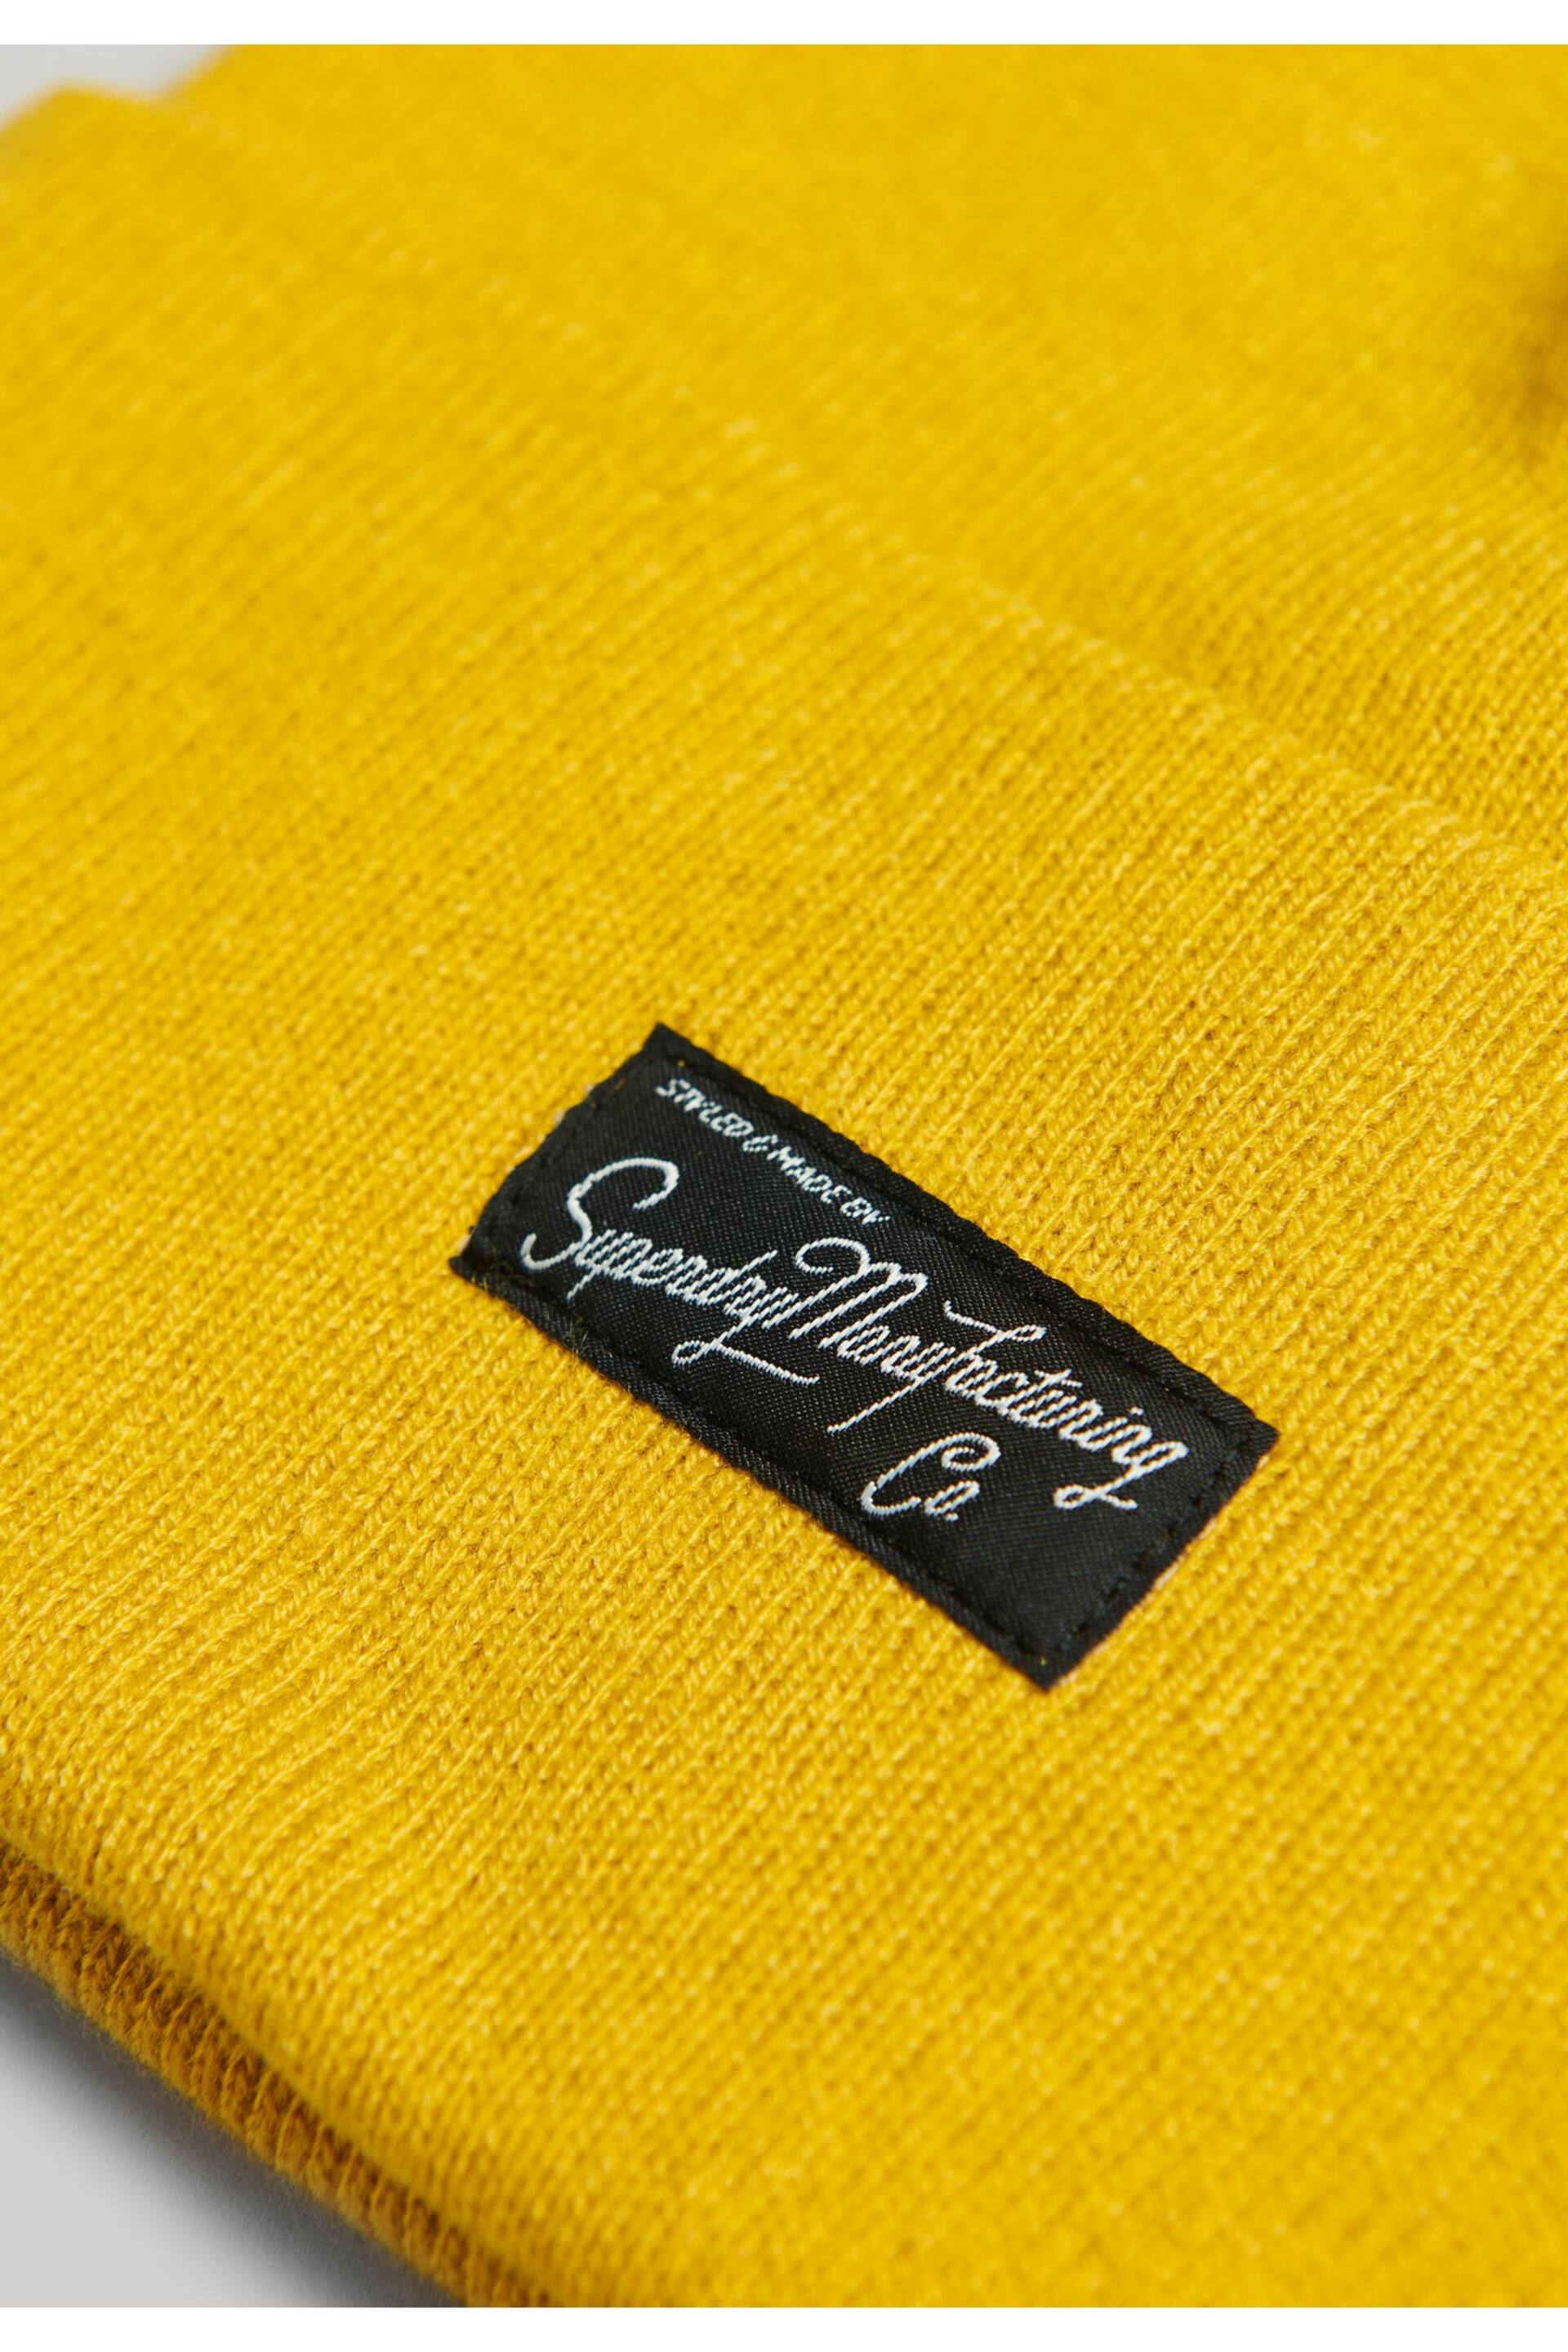 Superdry mustard yellow Essential Logo Bobble hat - Image 2 of 3